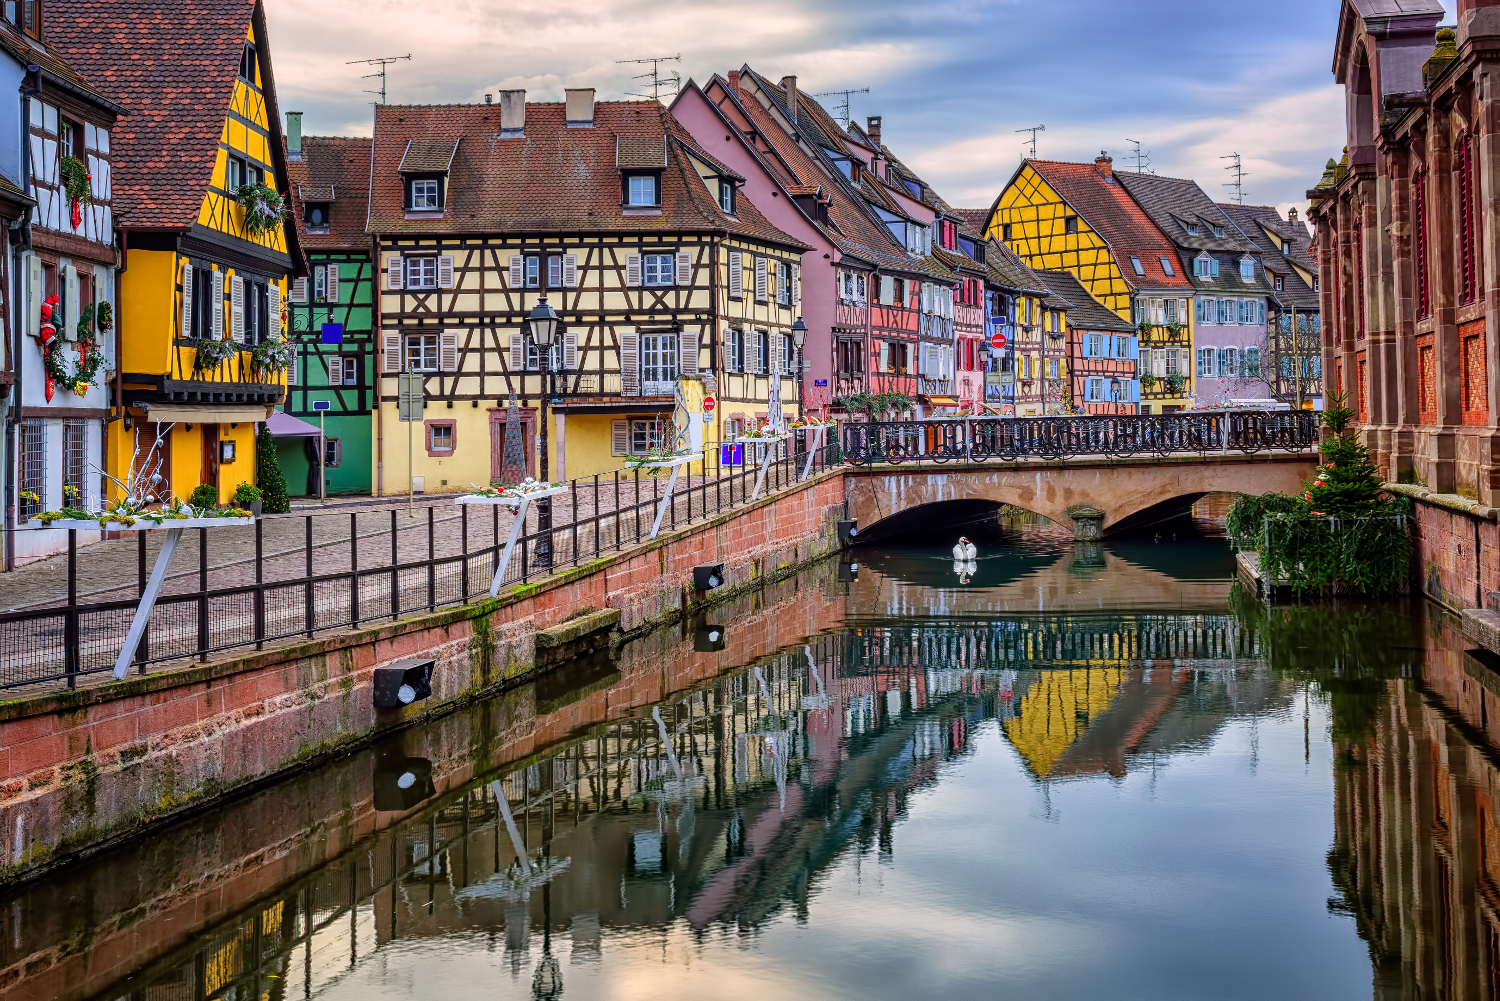 Colmar - Colorful medieval half-timbered facades reflecting in water, #France, #travel #best #photos and #places